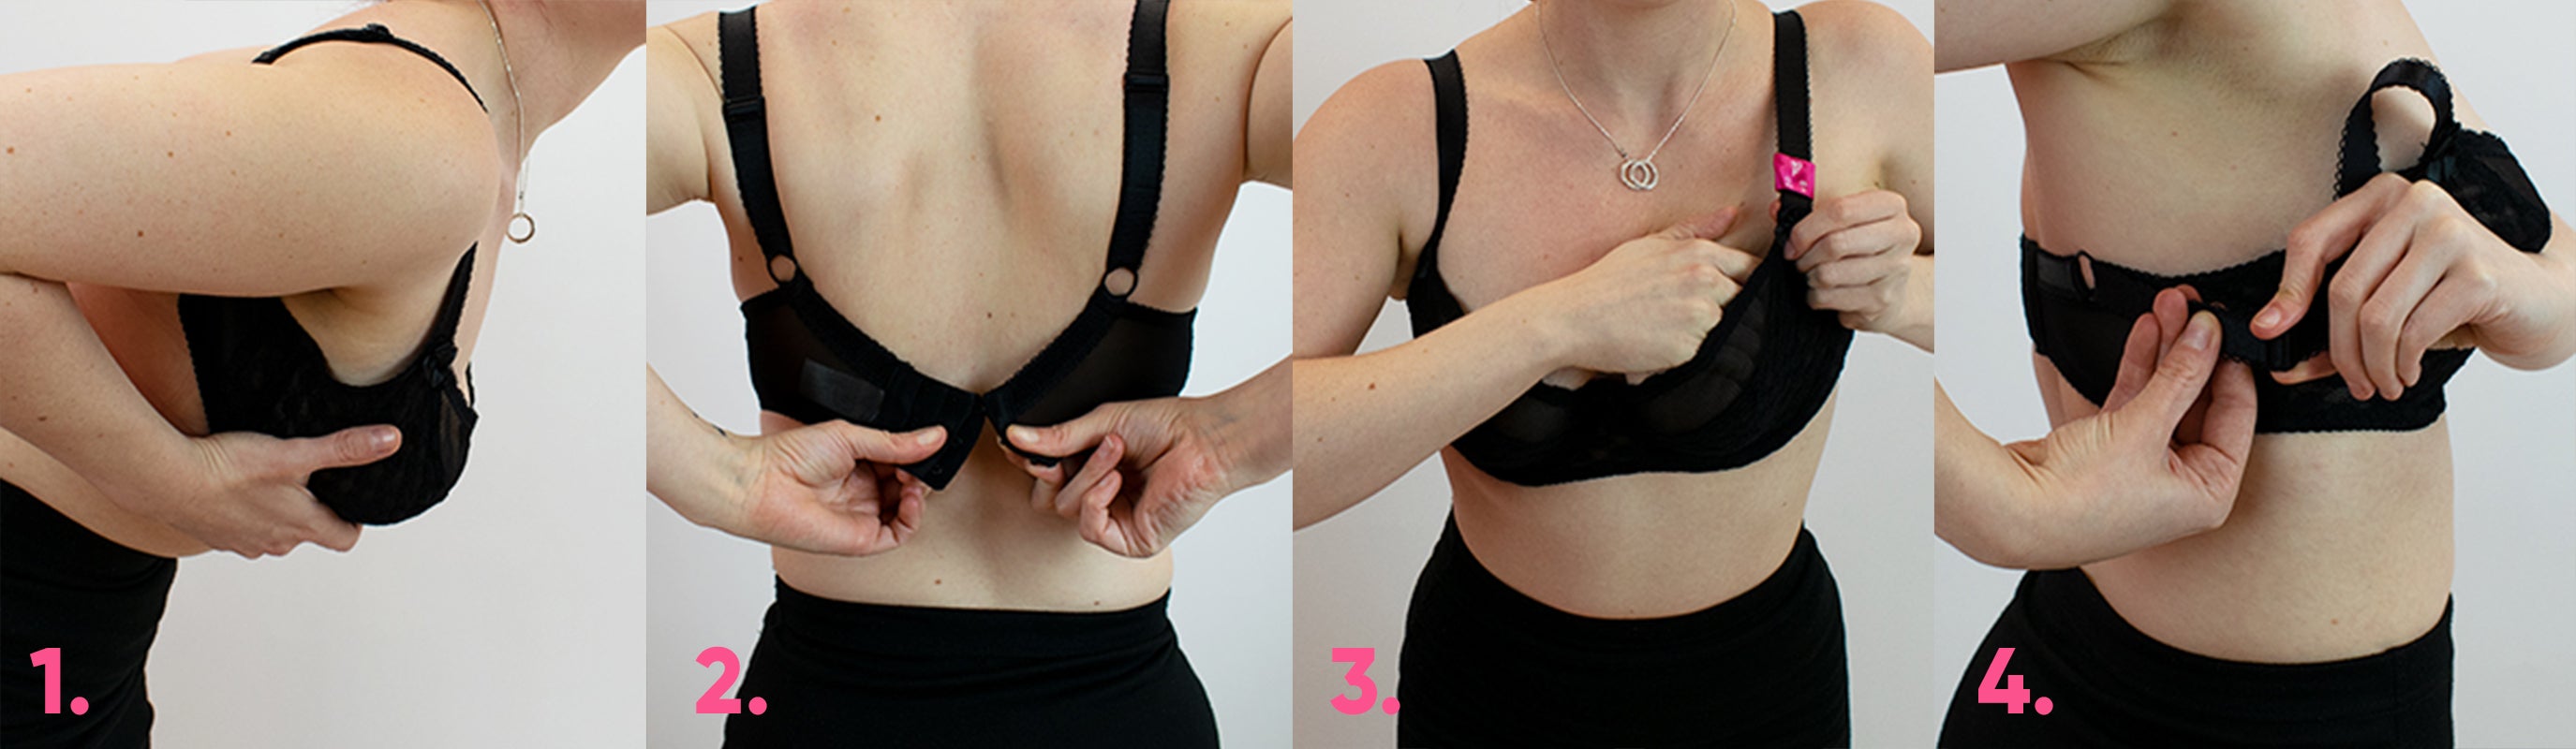 How to Put on a Bra 